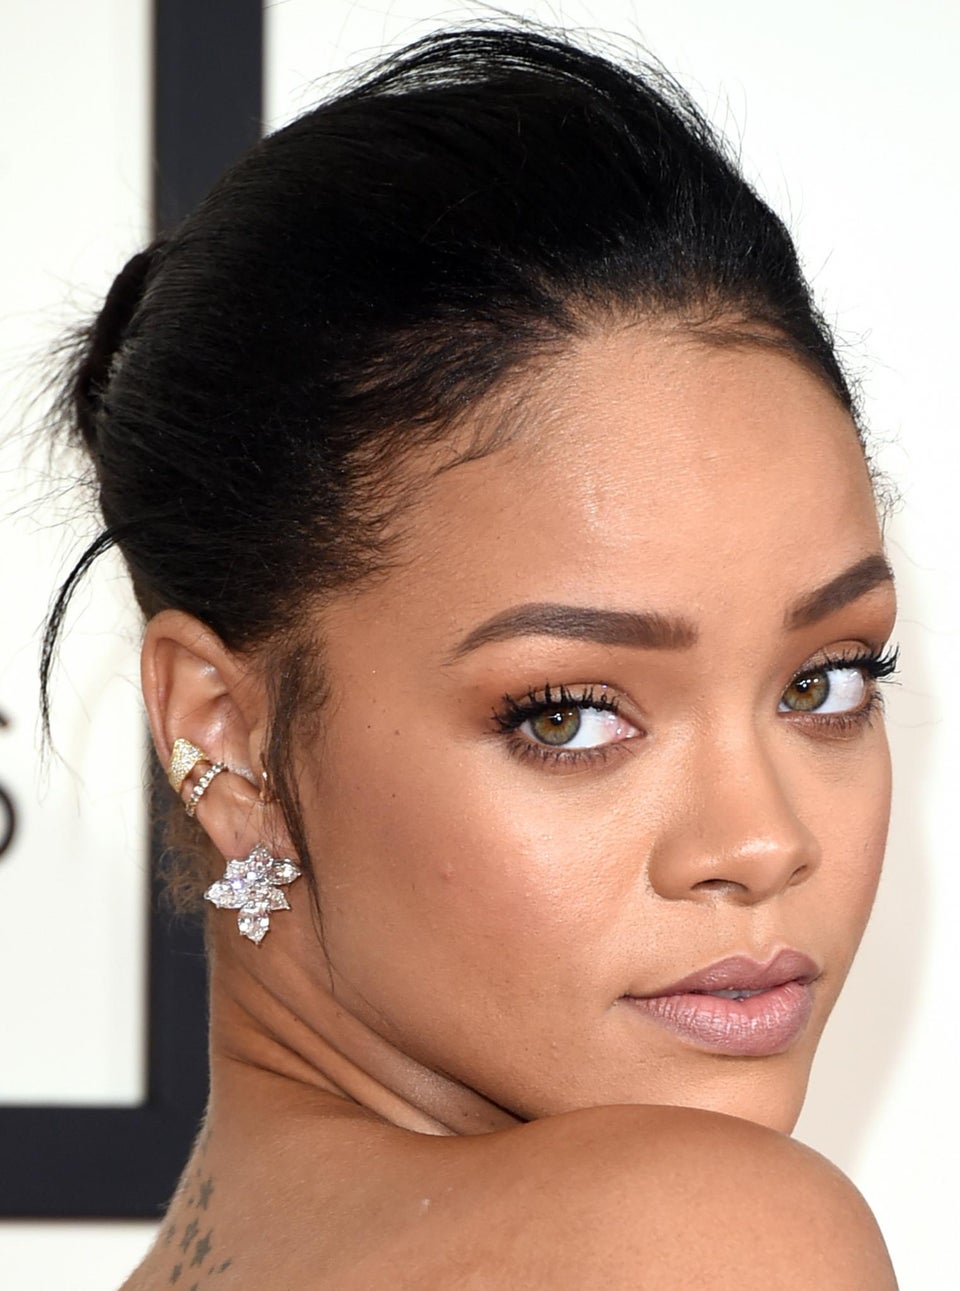 Rihanna On Being a Young Black Woman With Power